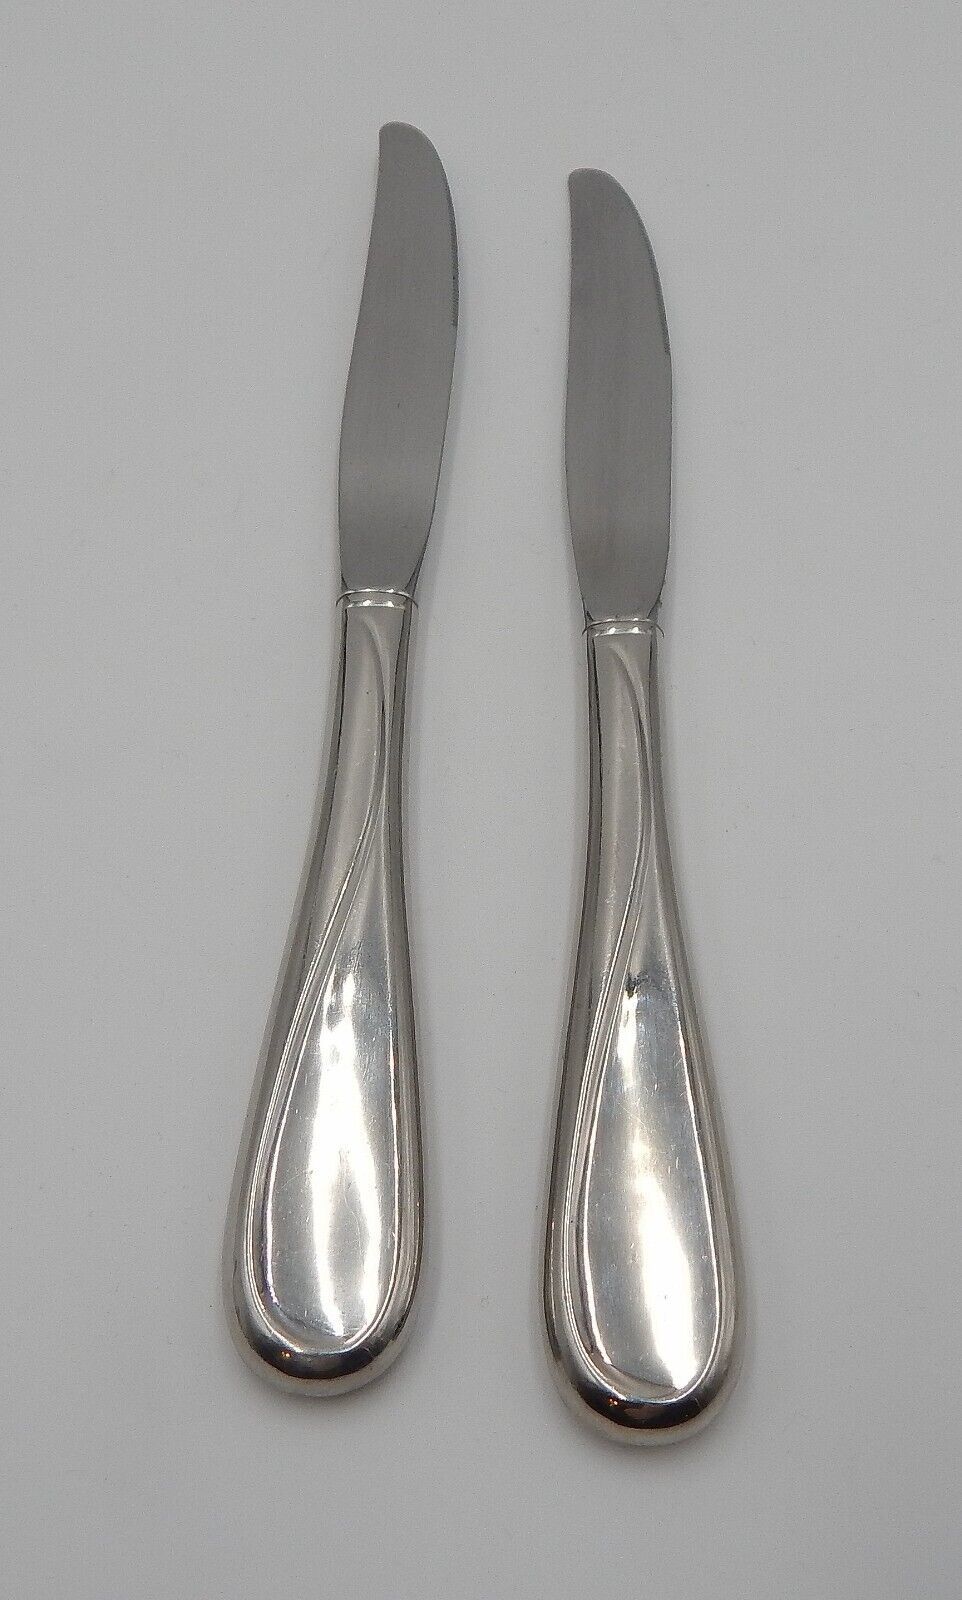 Primary image for Oneida Flight Reliance Dinner Knives Stainless USA 9 Inch Set of 2